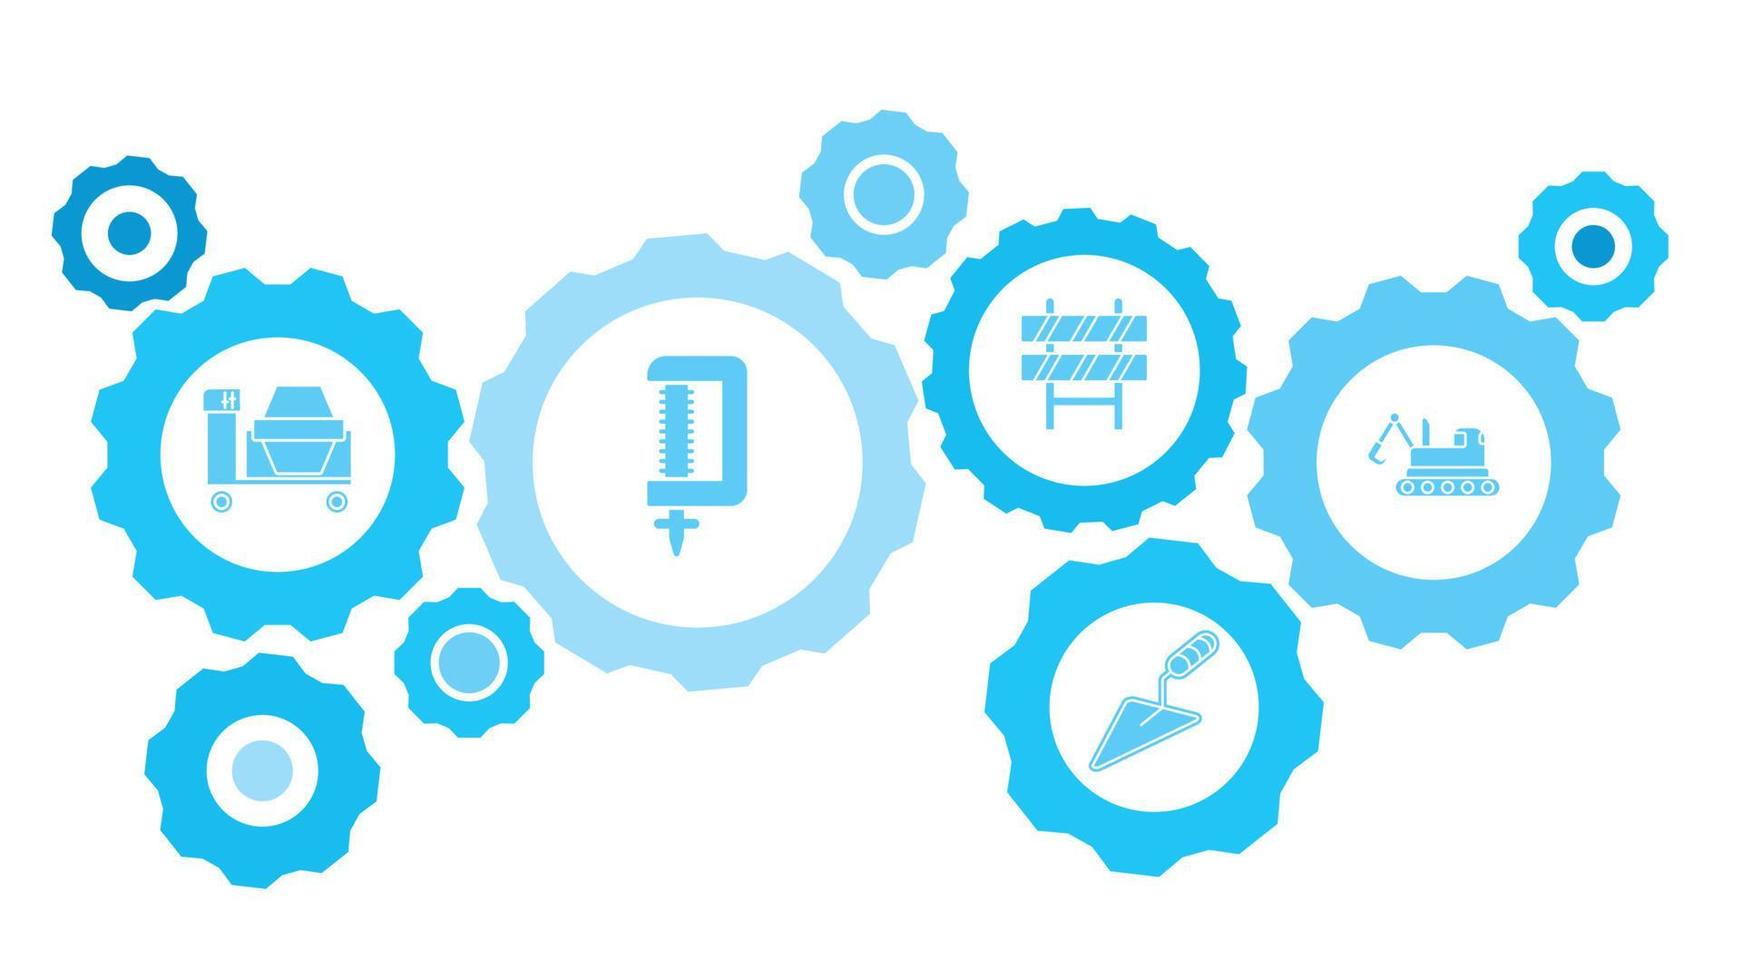 Connected gears and vector icons for logistic, service, shipping, distribution, transport, market, communicate concepts. building, construction, excavator gear blue icon set on white background